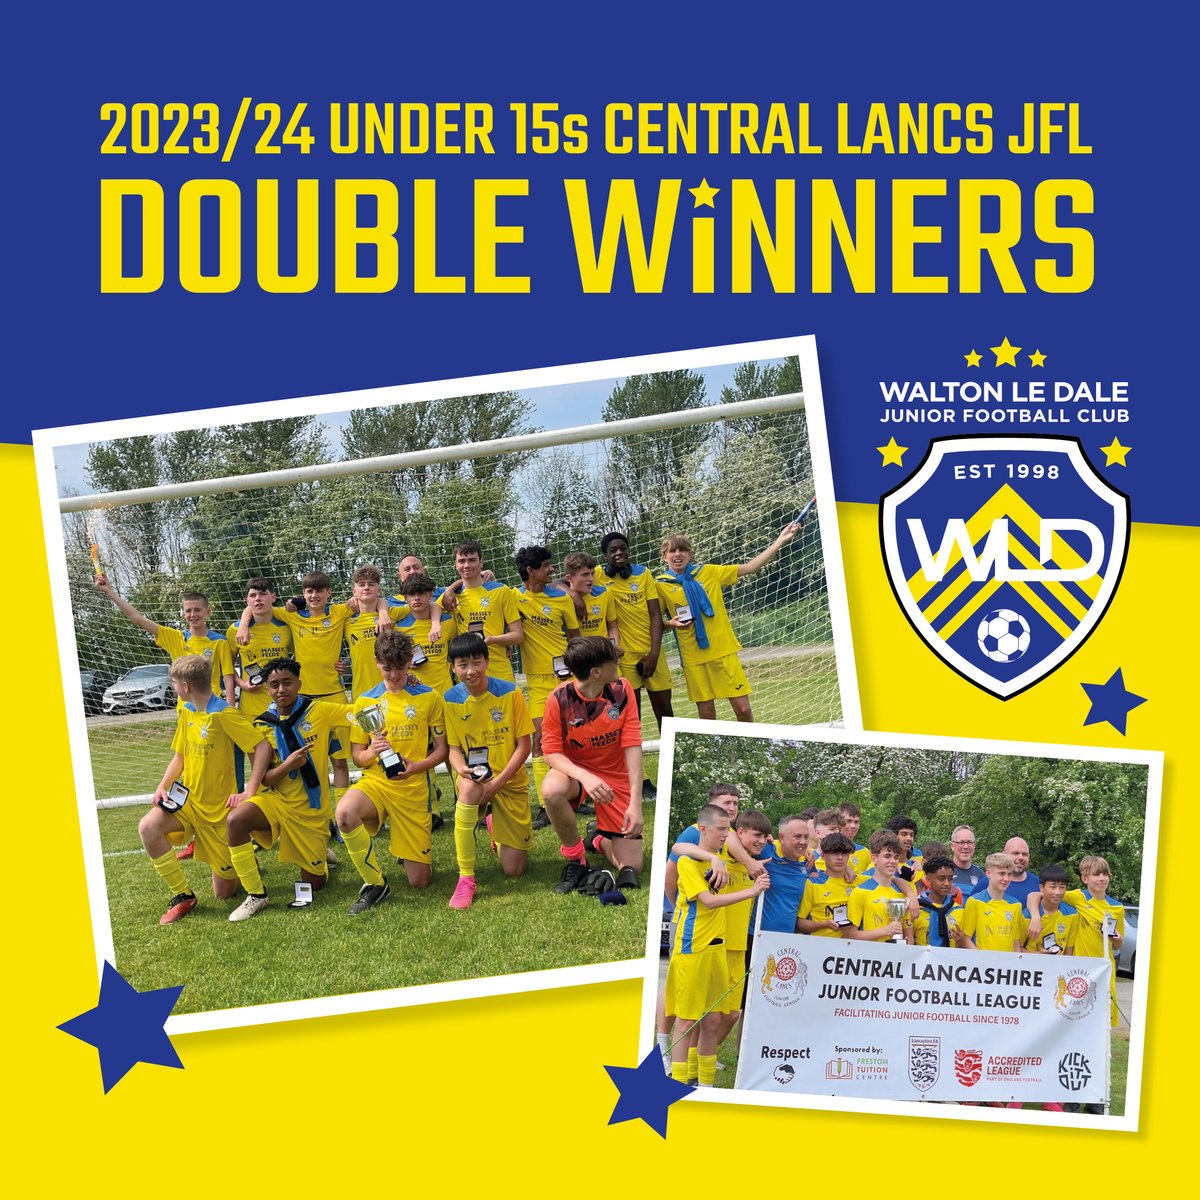 What better way to start the week than with a very special Monday mention for our U15 boys. Having completed an unbeaten season as league champions, they won their cup final too! Congratulations to our 'invincibles' of 2023/24 for their historic double! 🏆🏆💛🥳